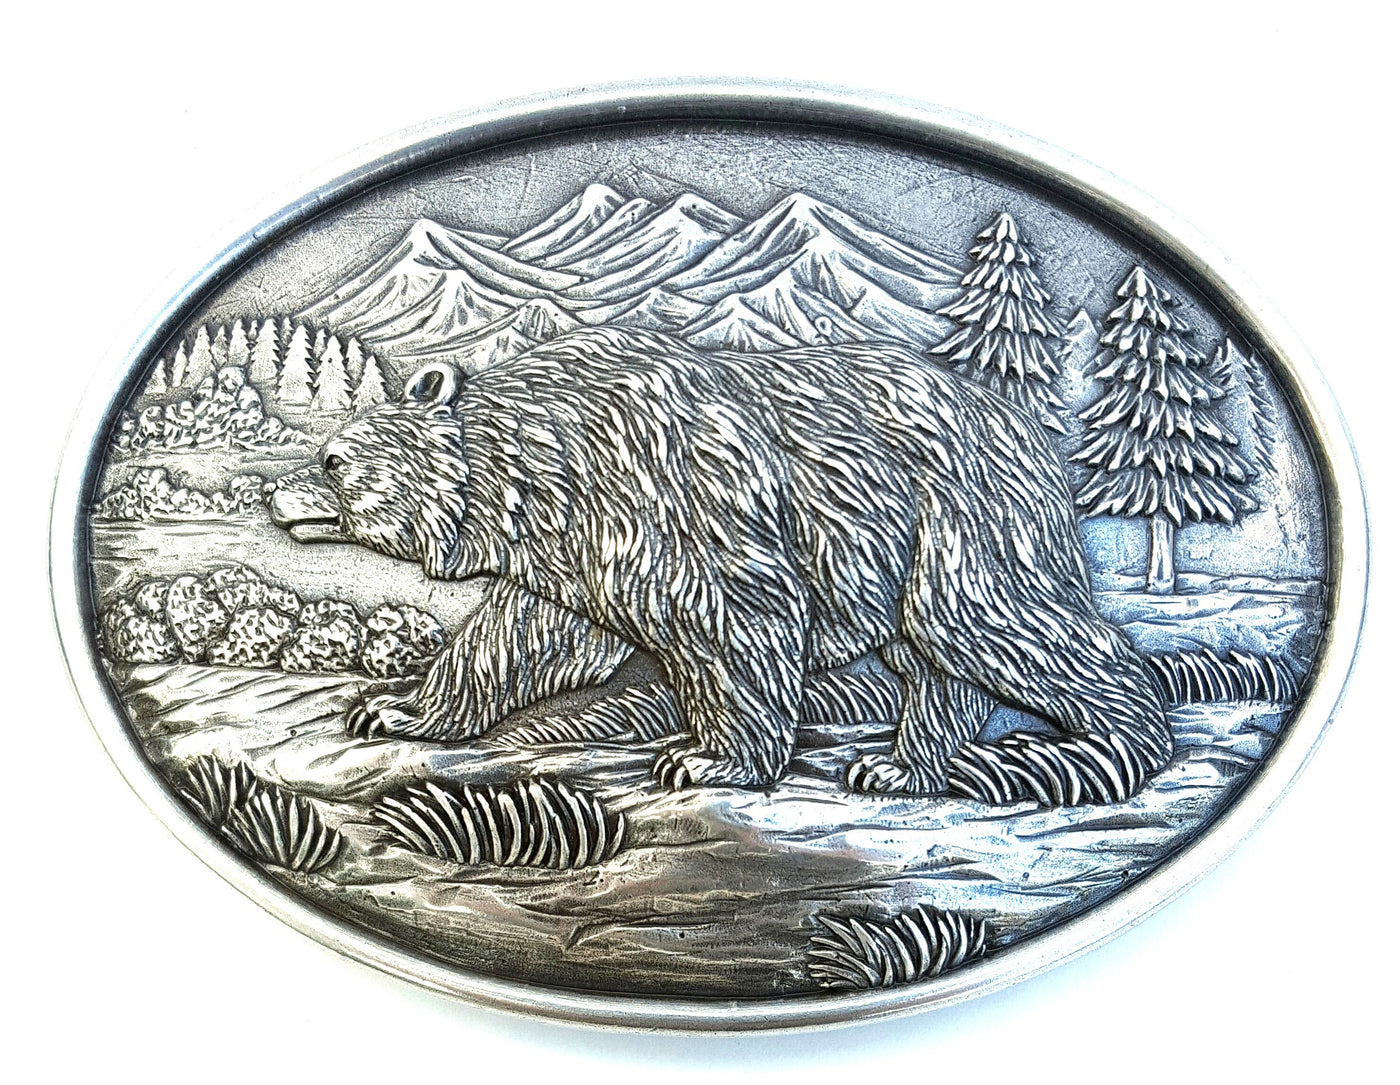 Nocona grizzly bear buckle, Nocona Western buckle Oval shaped buckle with a smooth edge accented with a bear walking in a mountain scenery. Measures: 3" X 4" Available online and in our shop in Smyrna, TN, just outside of Nashville.Nocona Western buckle Oval shaped buckle with a smooth edge accented with a bear walking in a mountain scenery. Measures: 3" X 4" Available online and in our shop in Smyrna, TN, just outside of Nashville.